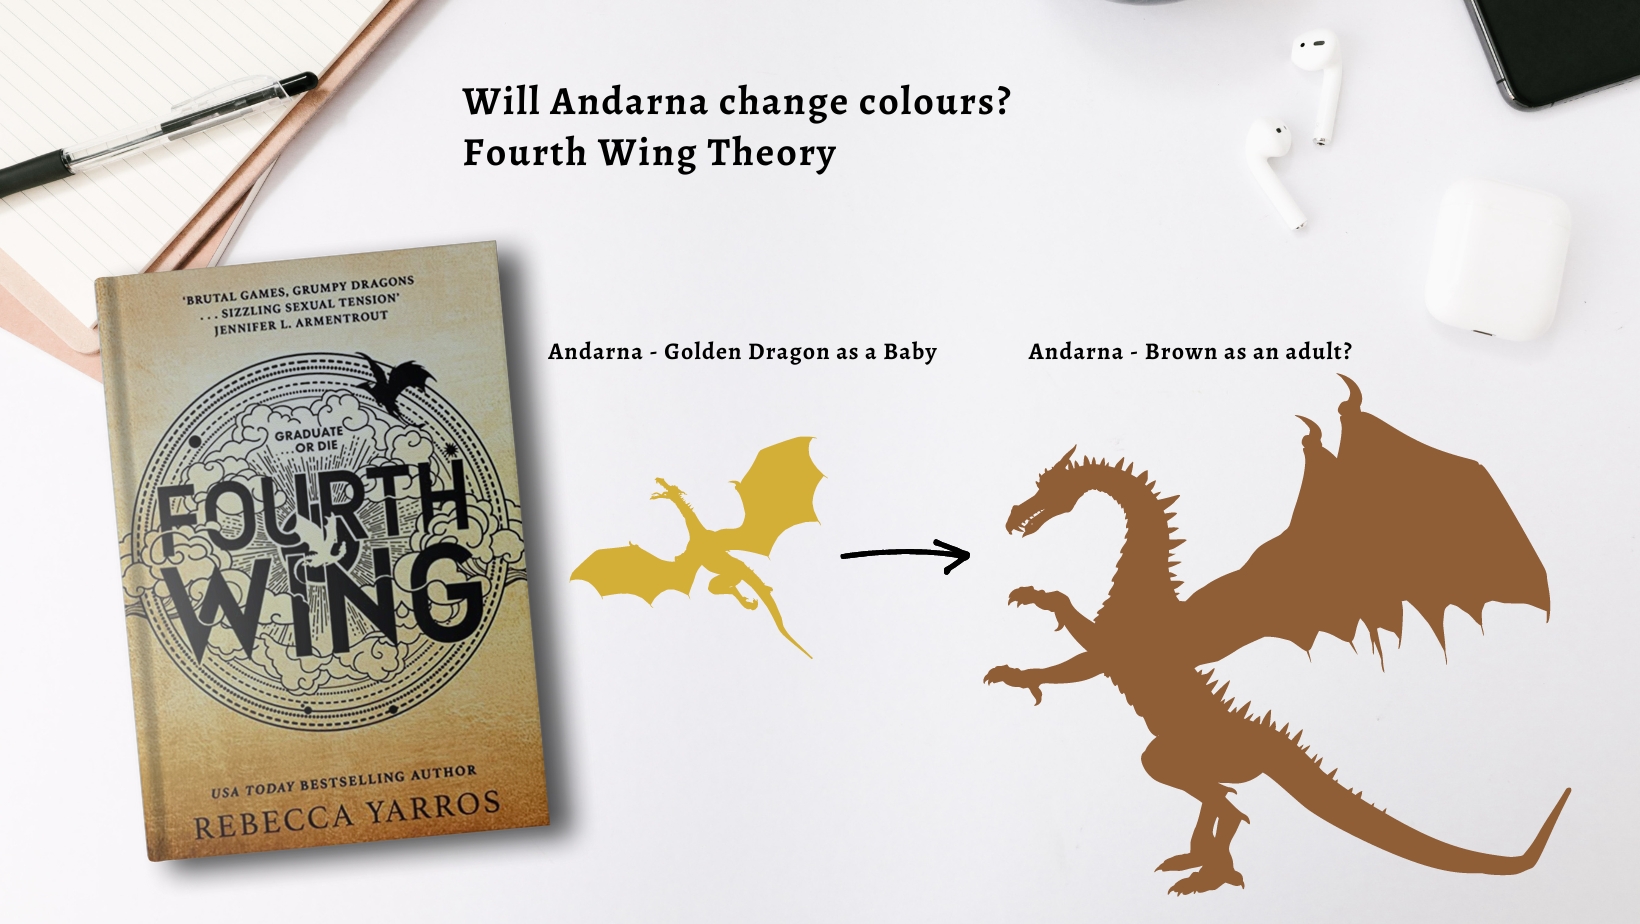 Fourth Wing Theory - Will Andarna change colour